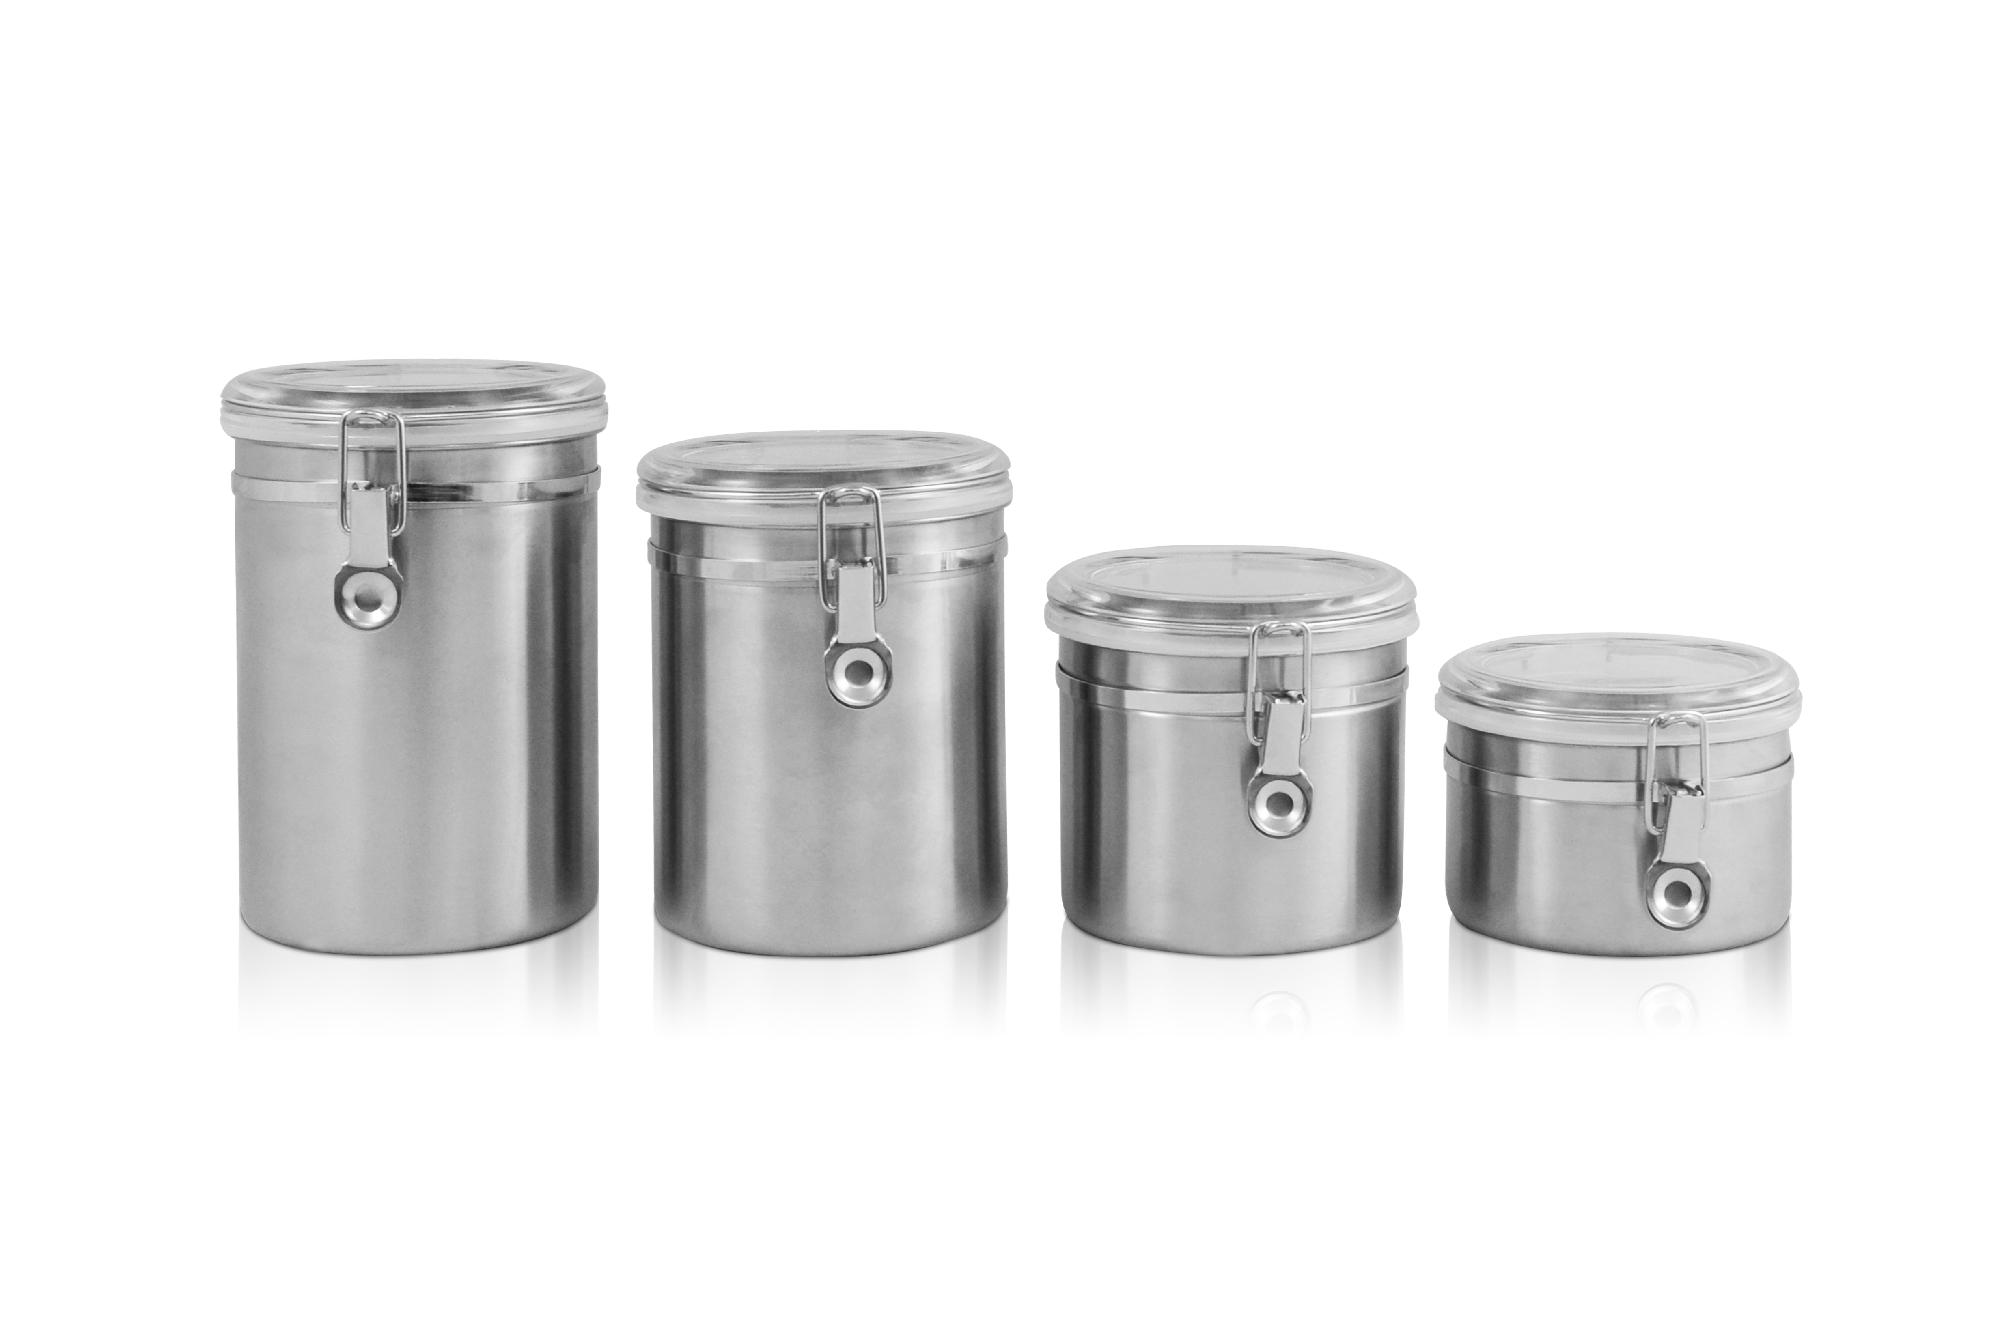 Ragalta 4 Pc. Stainless Steel Canister Set With Airtight Lids